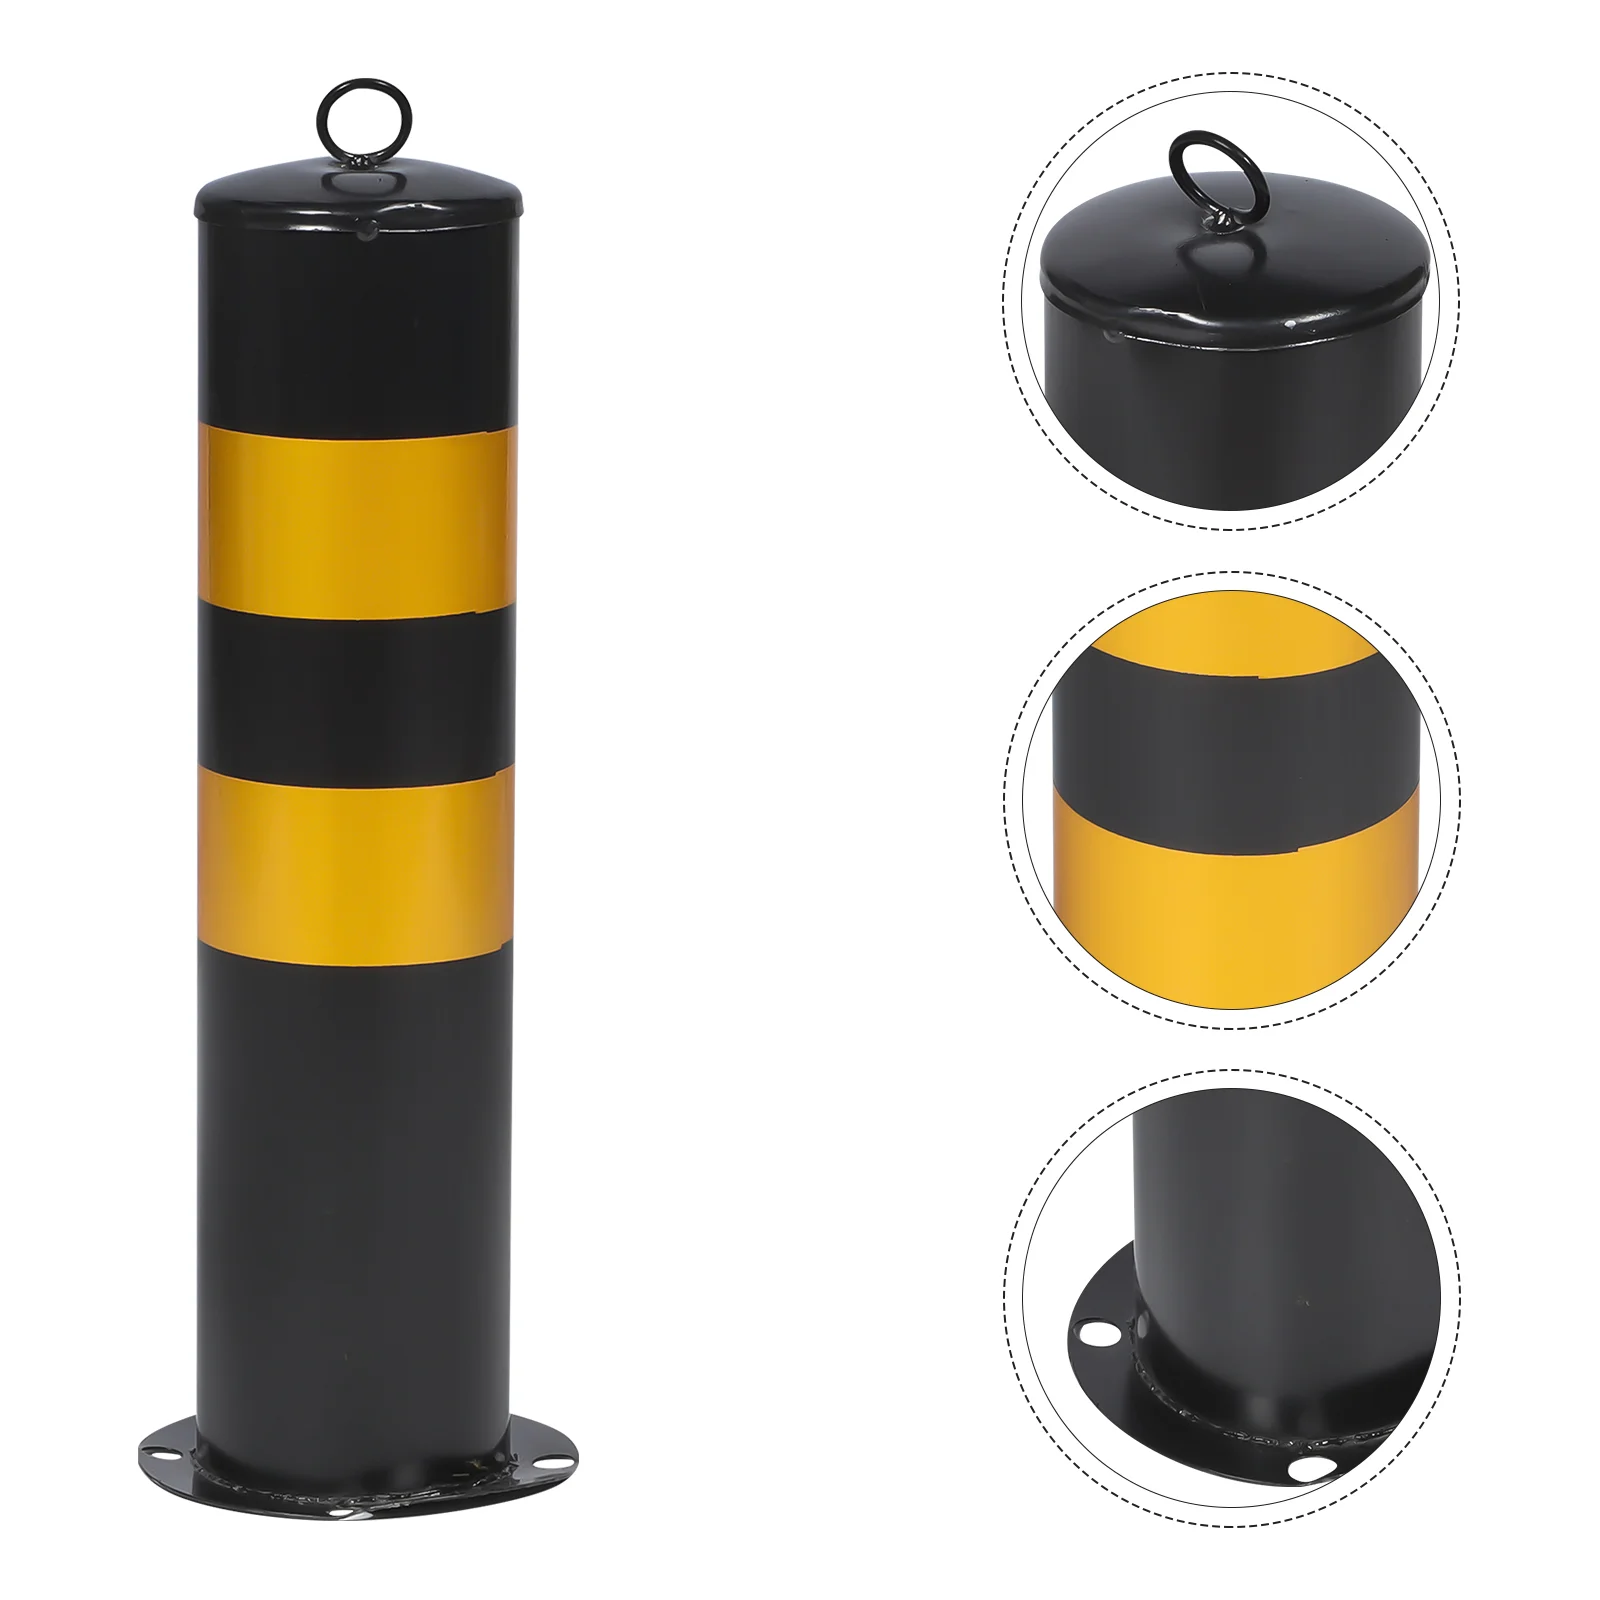 Safety Traffic Bollard Post Parking Driveway Barrier Lot Column Cones Bollards Pile Fence Gate Delineator Guard High Stopper 9inch colored traffic cones safety parking sports training cones agility marker for soccer skating football indoor outdoor games